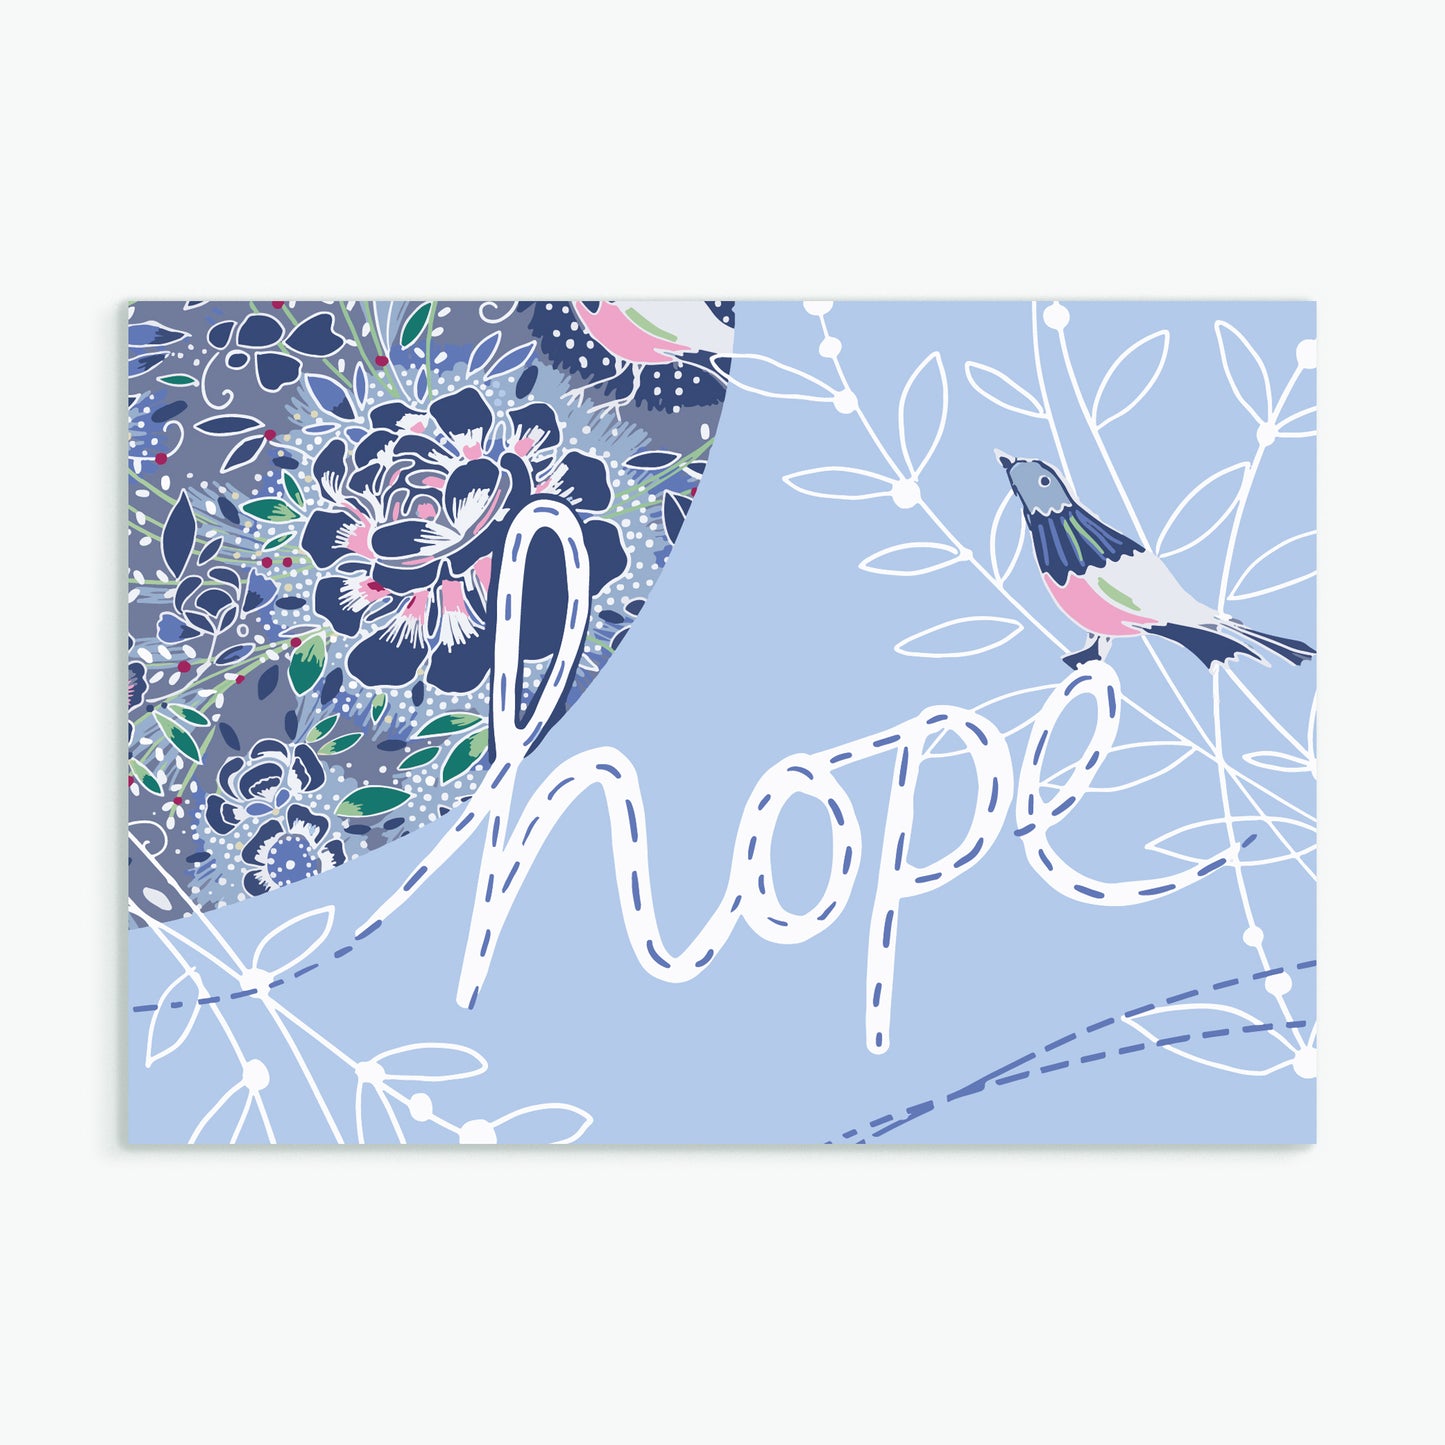 'Hope'  greeting card by Emily Kelly